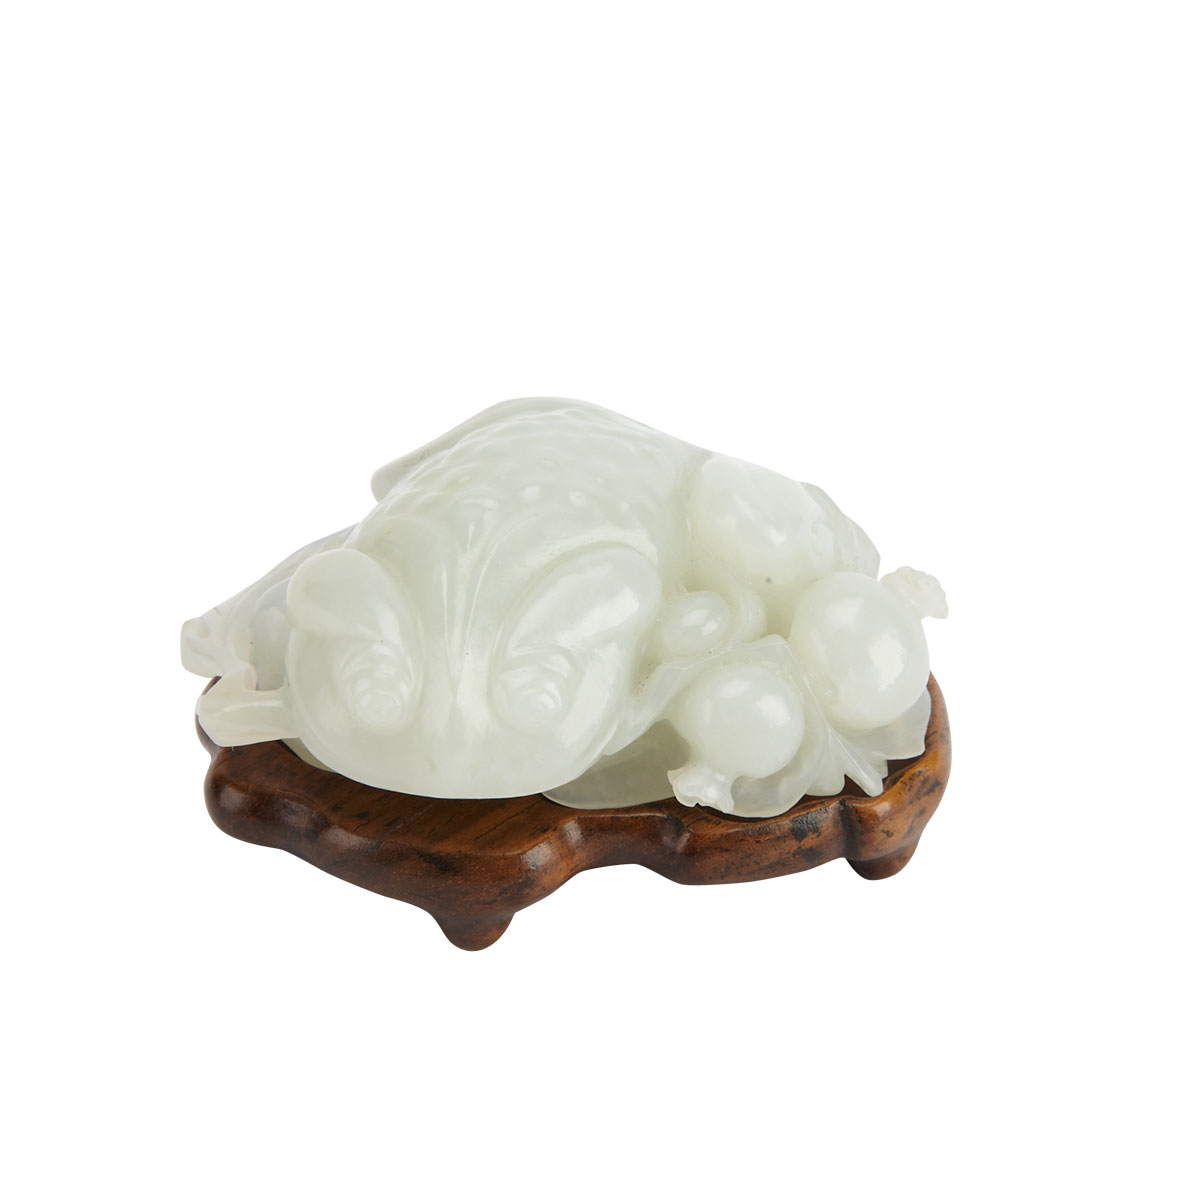 White Jade Carving of a Toad 18th 19th 176c3f